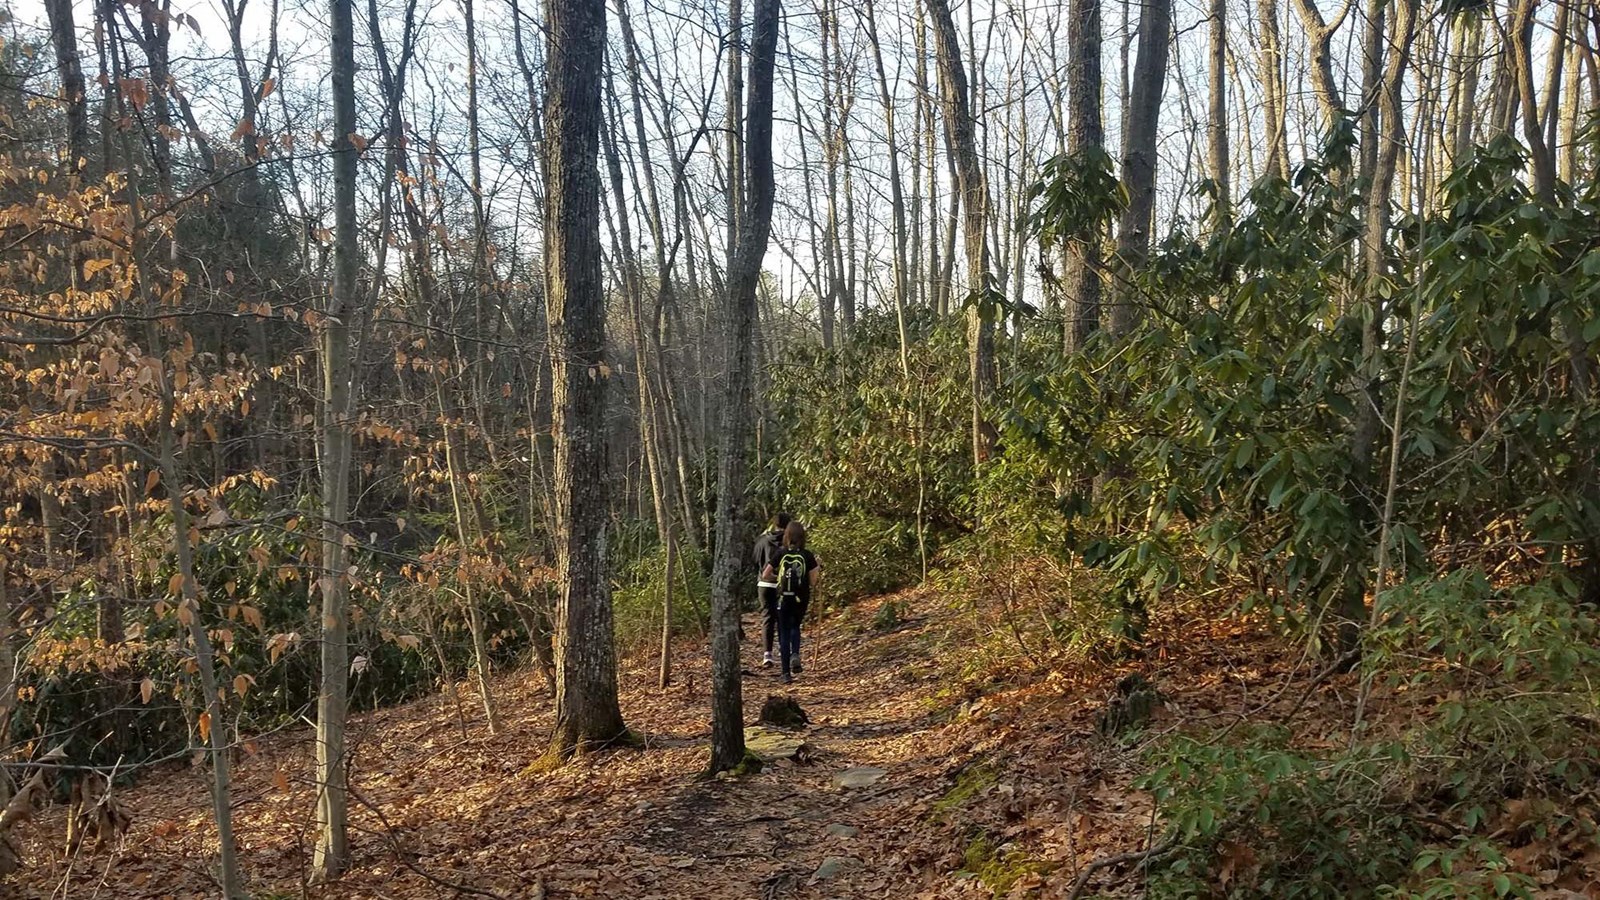 Hikers walking along a leaf covered trail